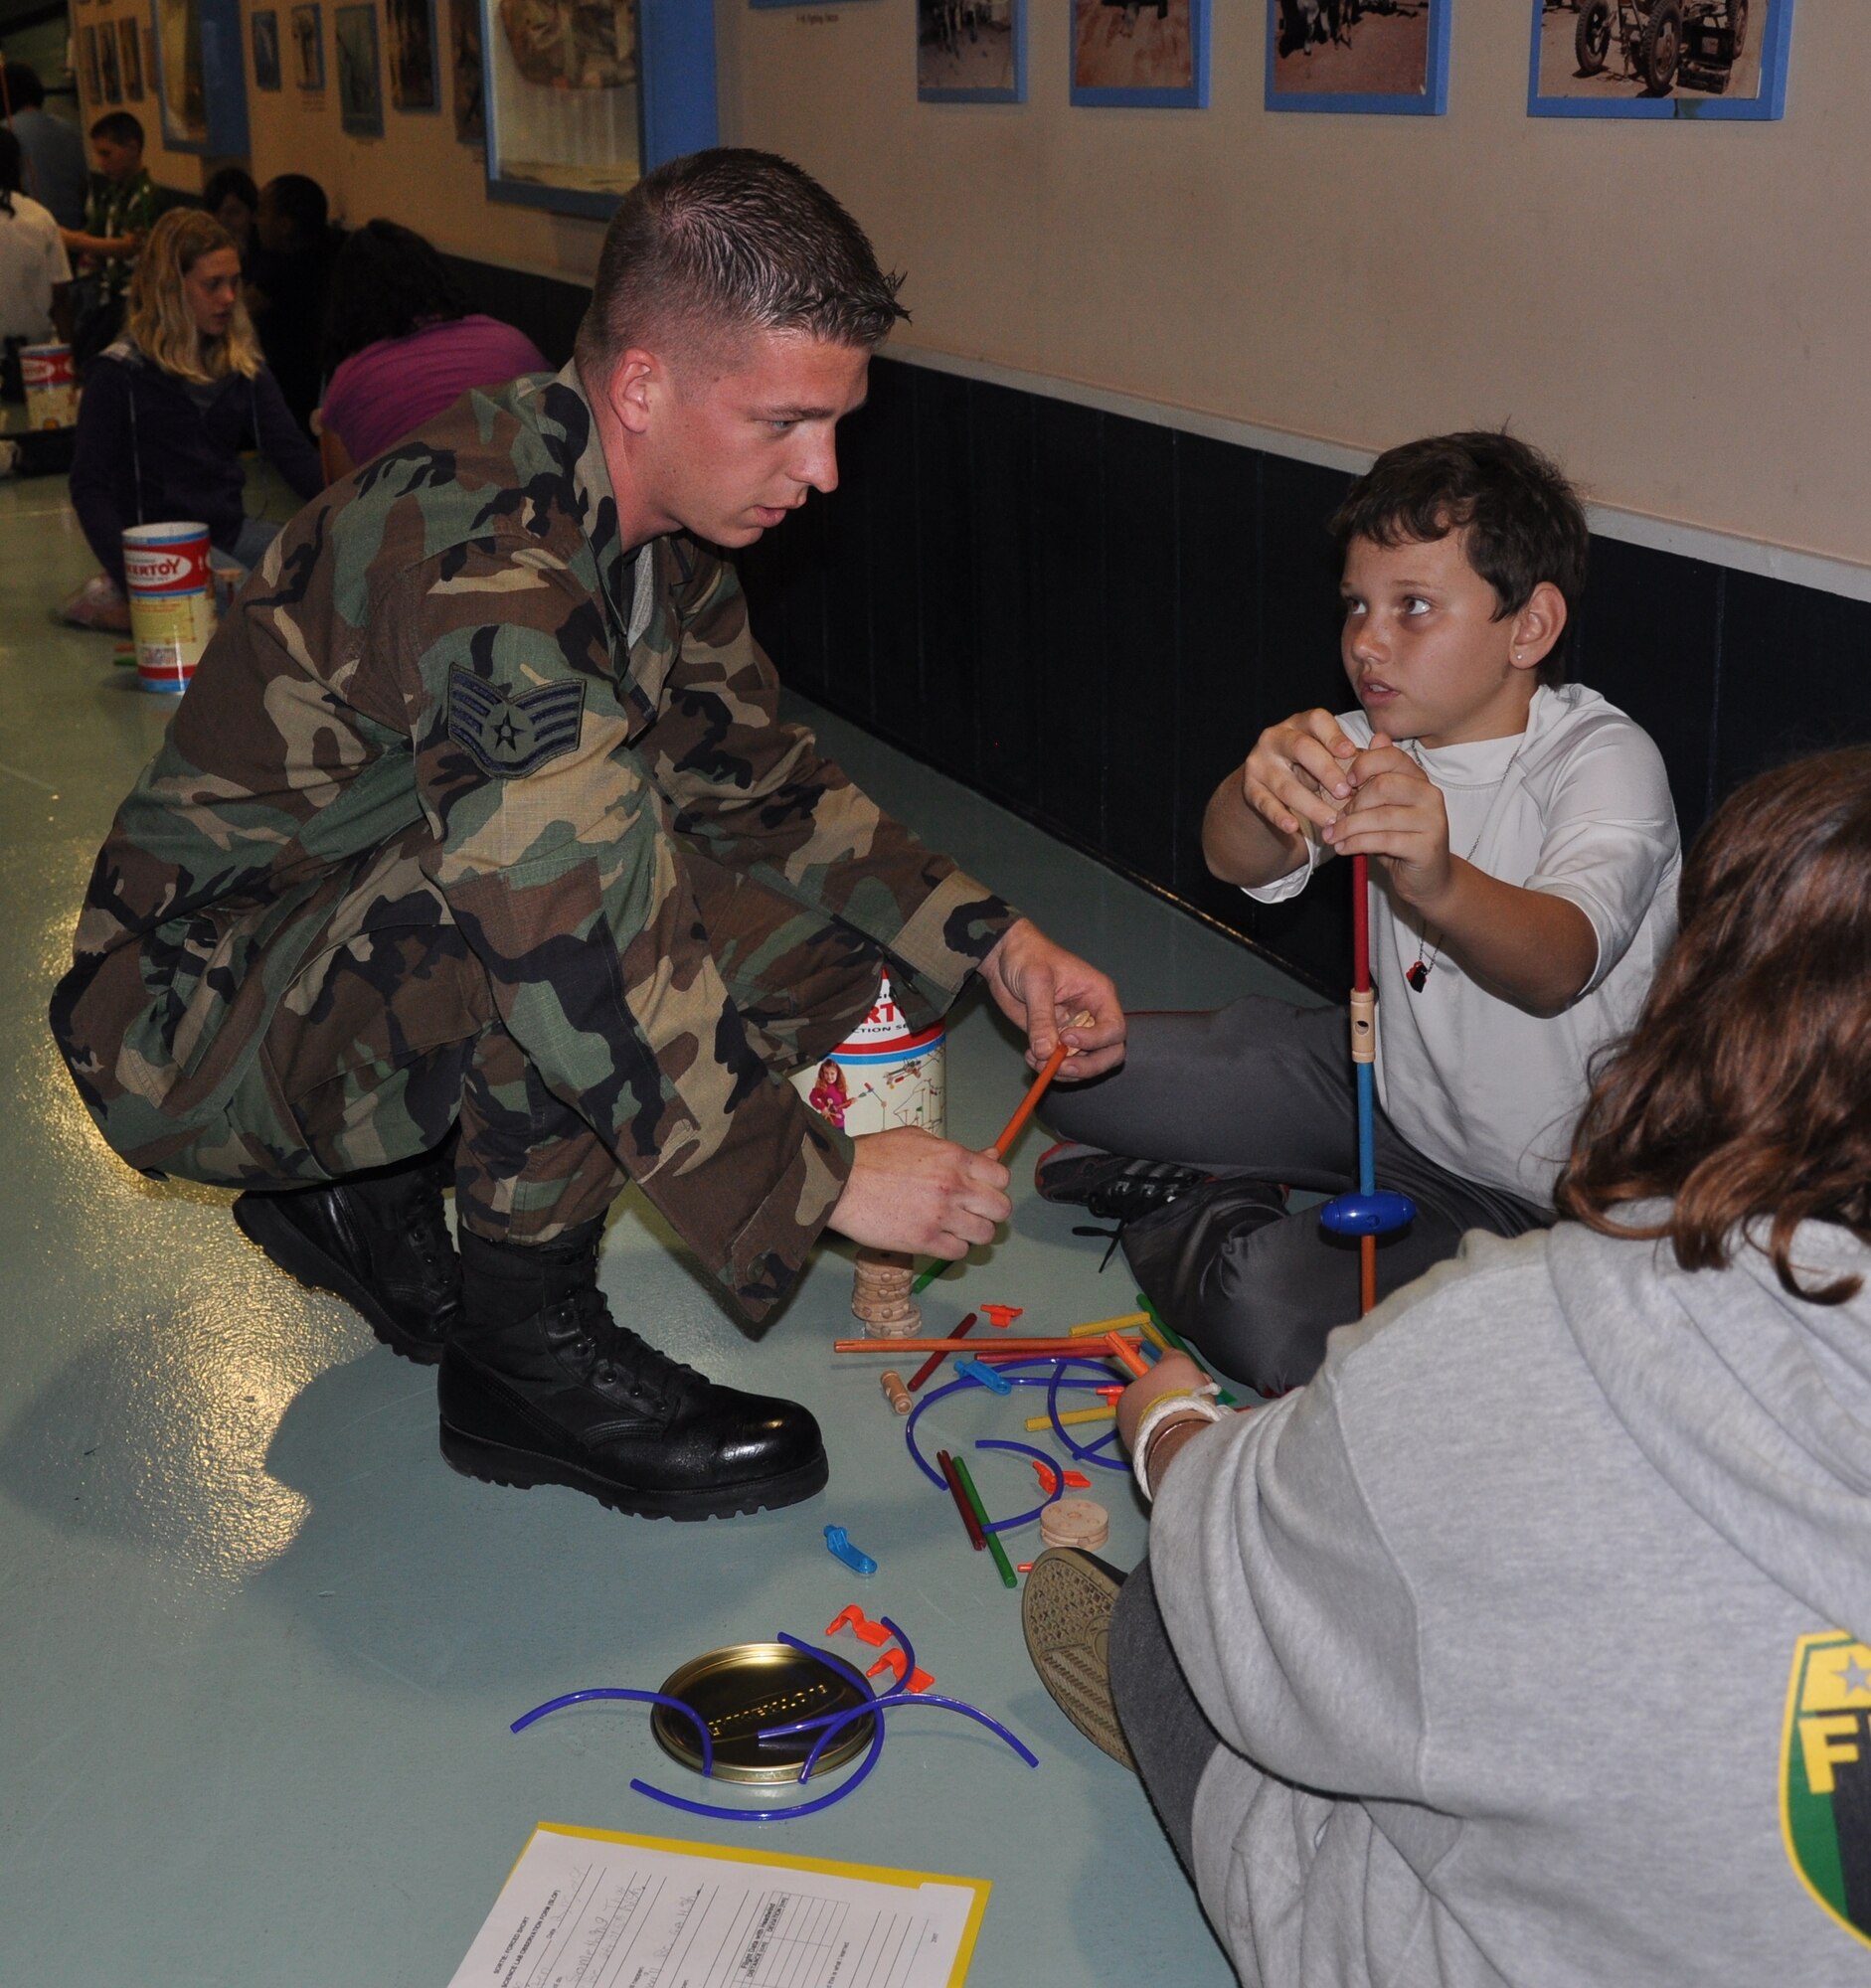 EGLIN AIR FORCE BASE, Fla. -- Staff Sgt. Bradley Barkley, a volunteer from the 33rd Fighter Wing, helps Dustin Ethridge, Shalimar Elementary School student, build a tower out of Tinker Toys during the school's "Engineers for America" program at the Air Armament Museum here Feb. 18-19. (U.S. Air Force photo/Chrissy Cuttita)